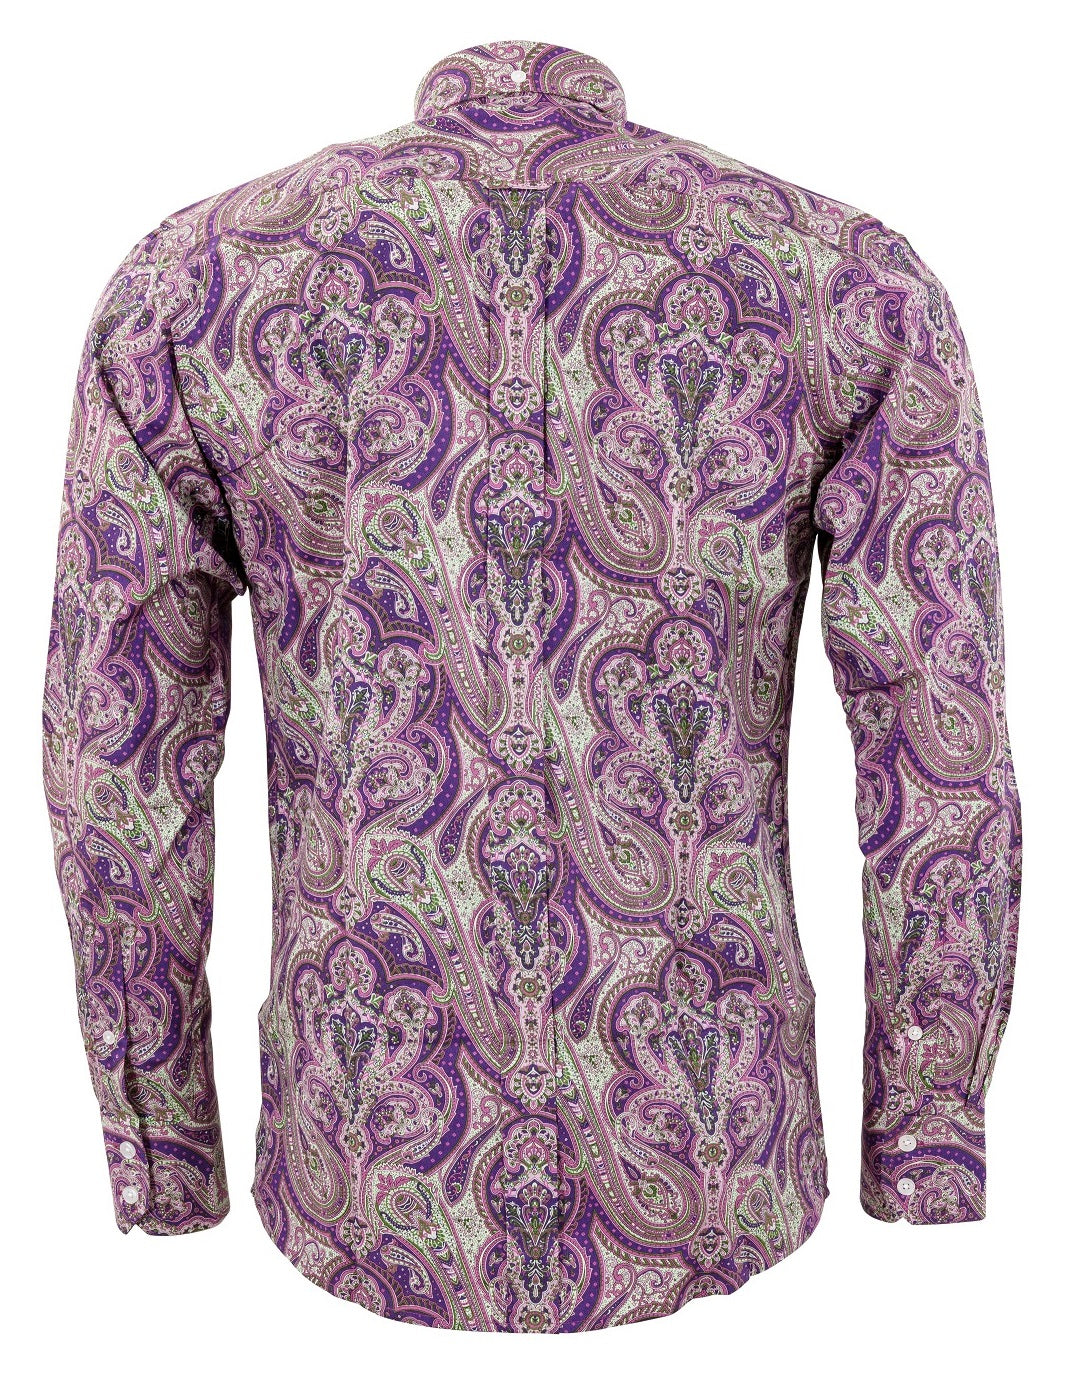 Relco Purple Paisley 100% Cotton Long Sleeved Button Down Shirts